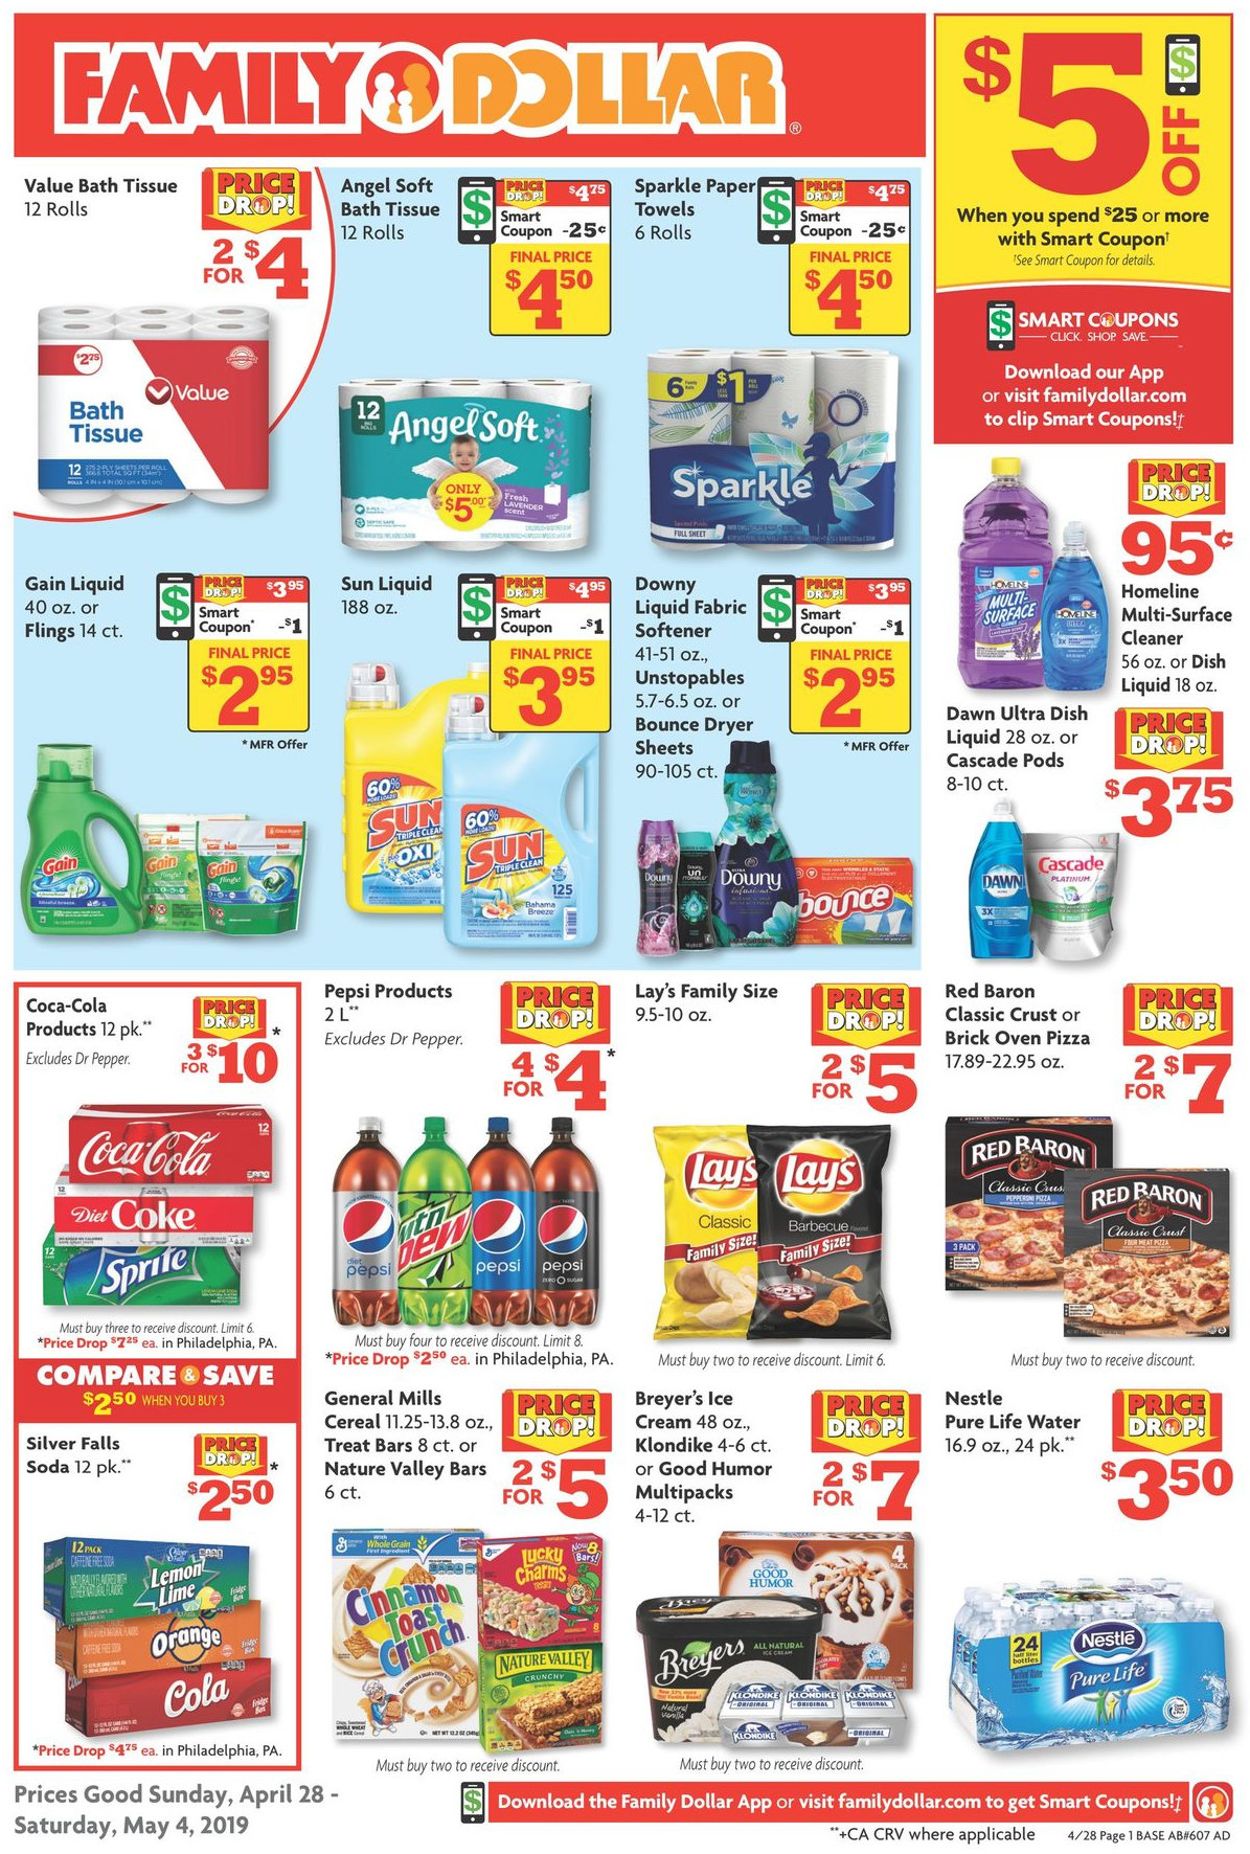 Family Dollar Current weekly ad 04/28 05/04/2019